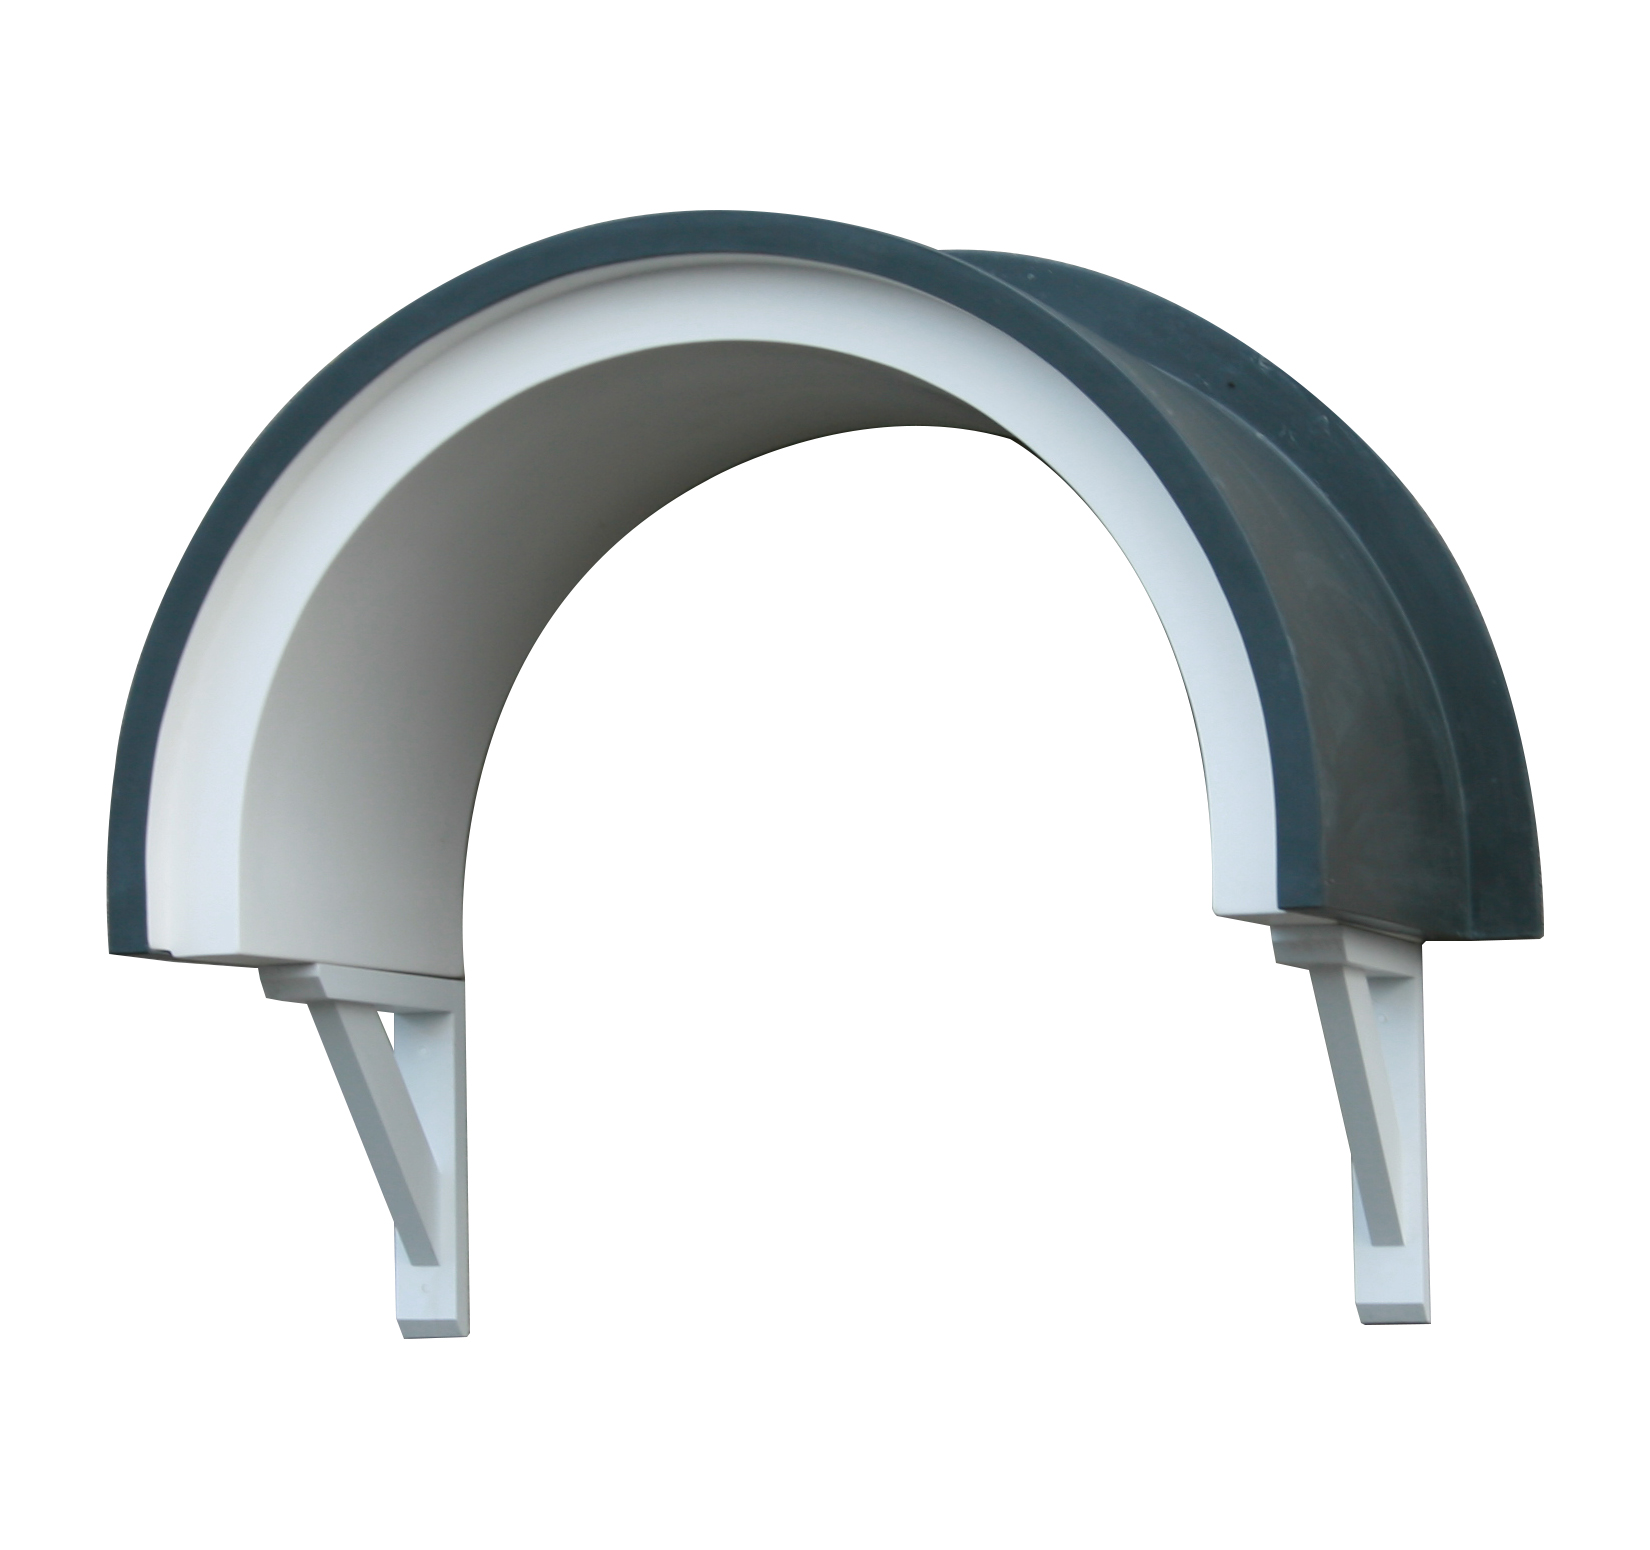 Lacock Replica Lead Curved Roof Entrance Porch Canopy 600 x 1180mm